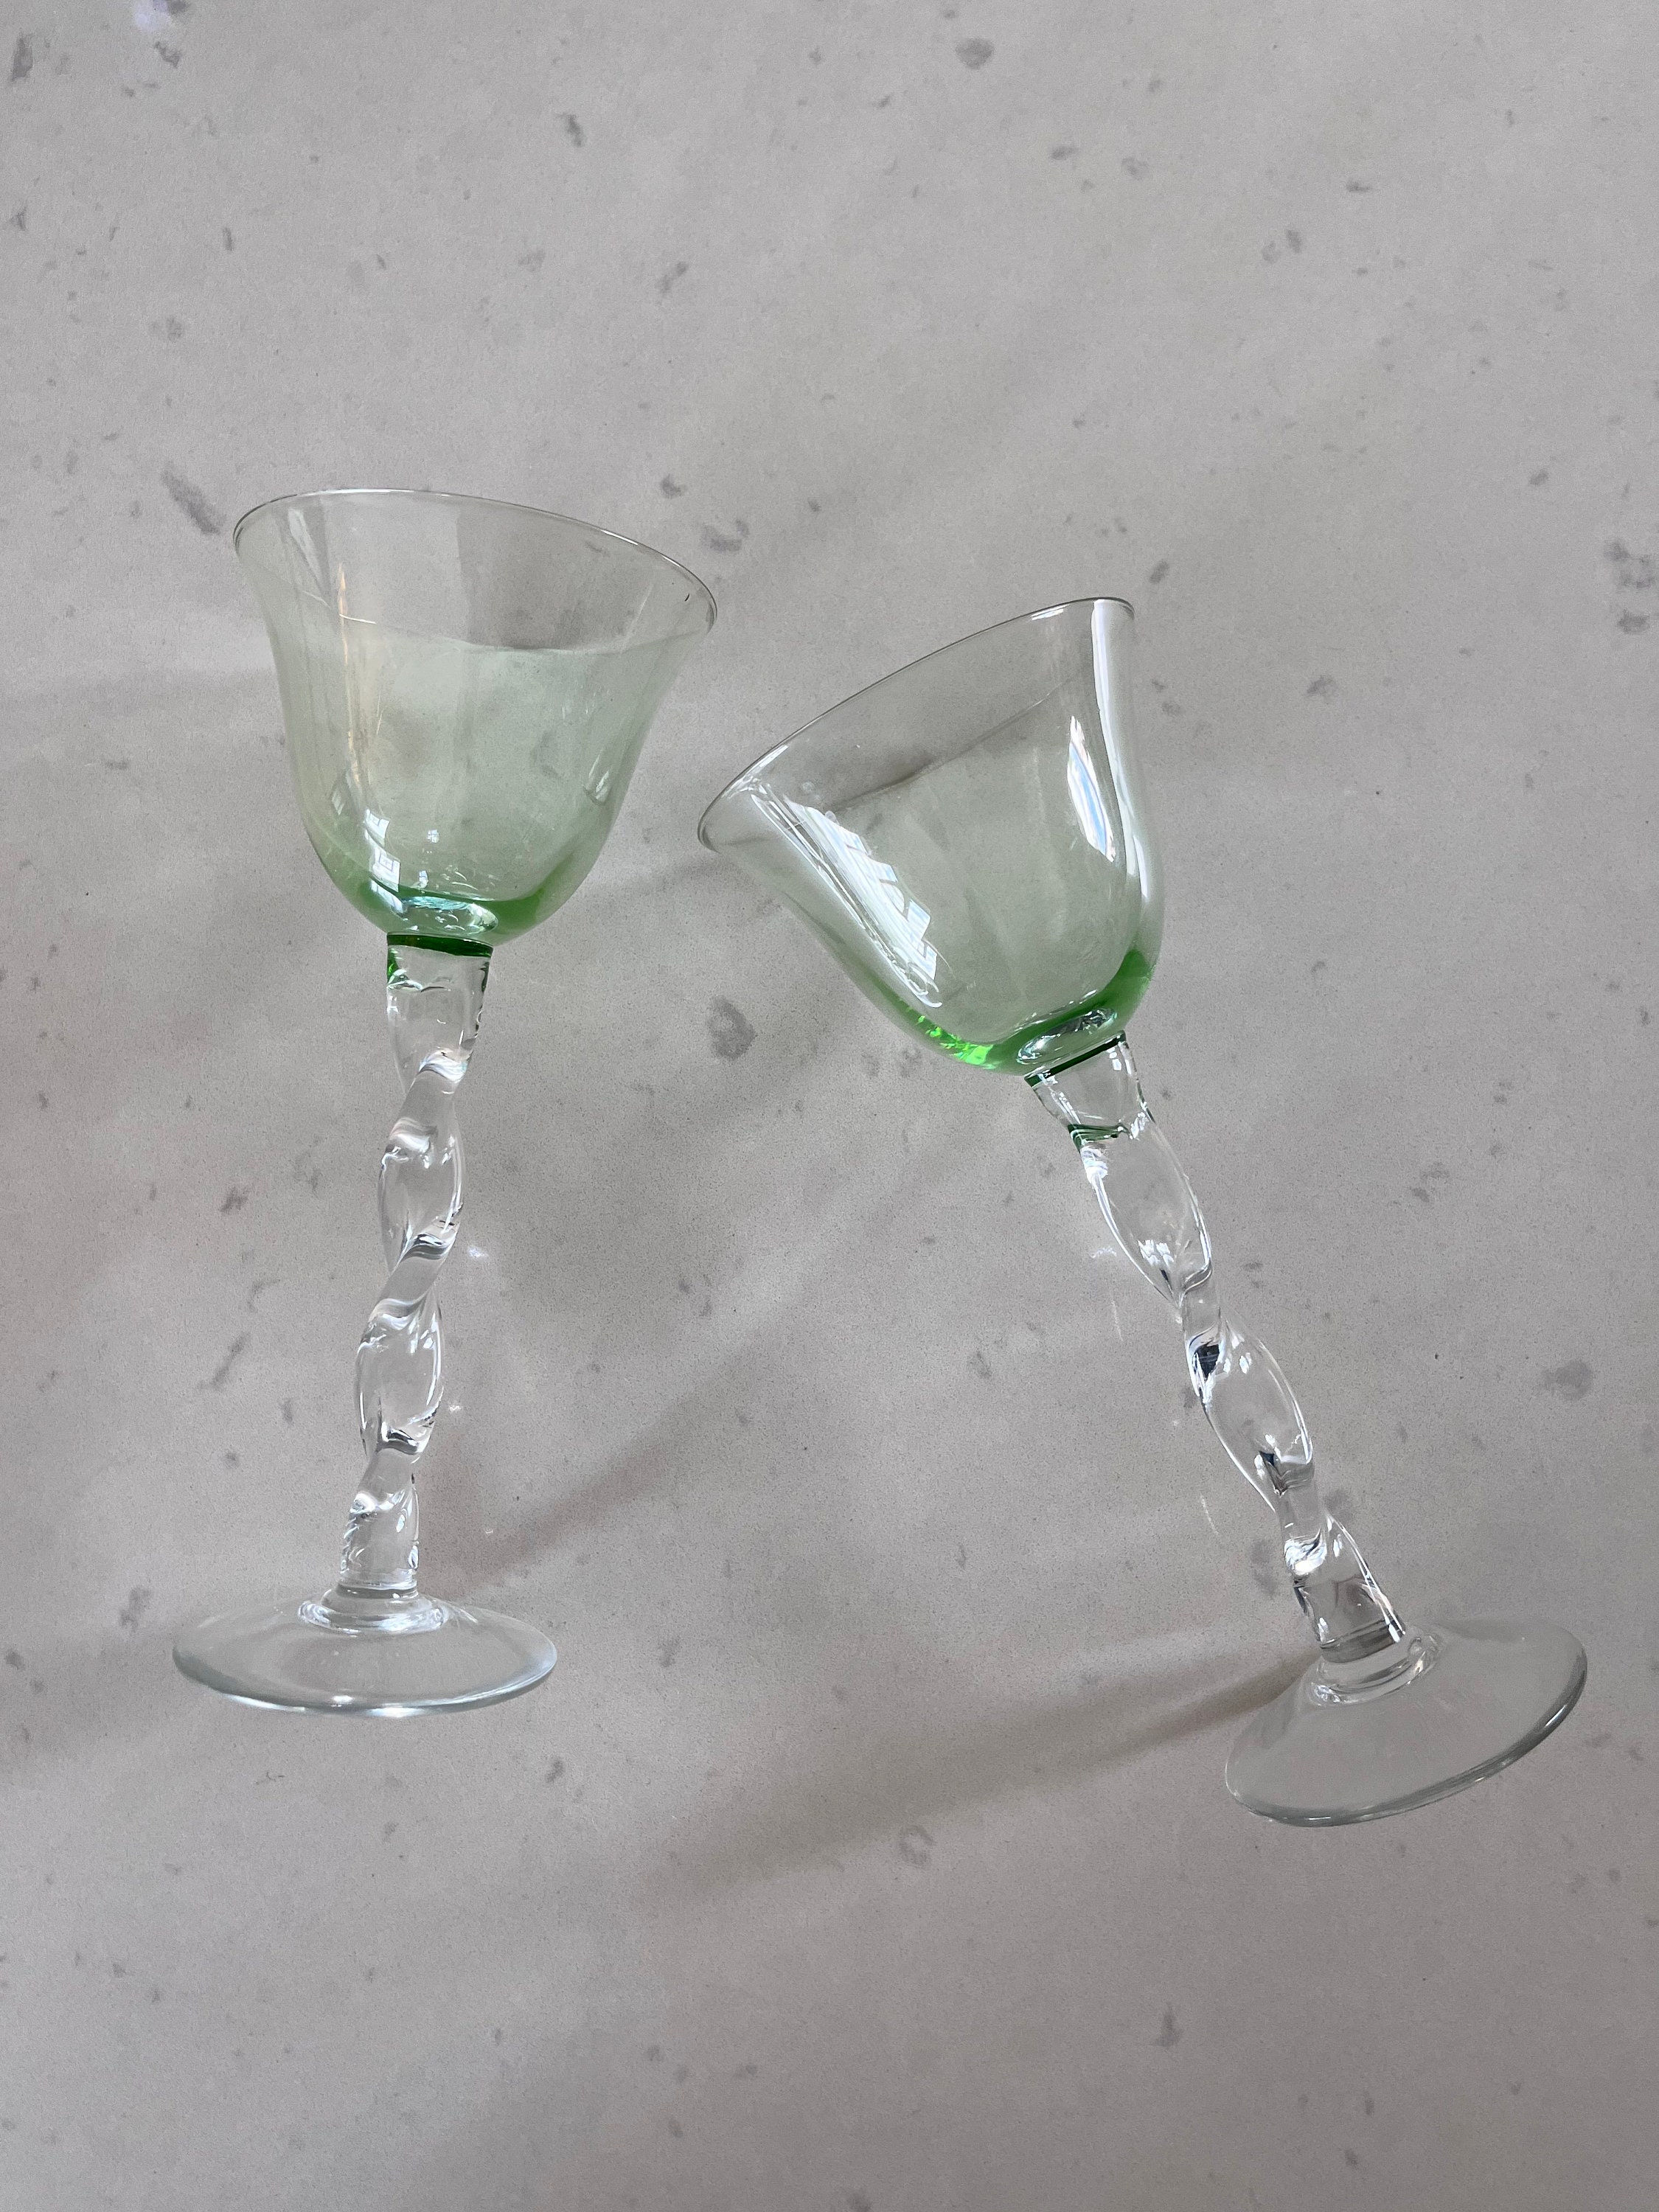 MEXHANDCRAFT Emerald Green Rim 10 oz Martini Glasses (Set of 6), Recycled Glass, Lead-Free, Toxin-Free (Martini)